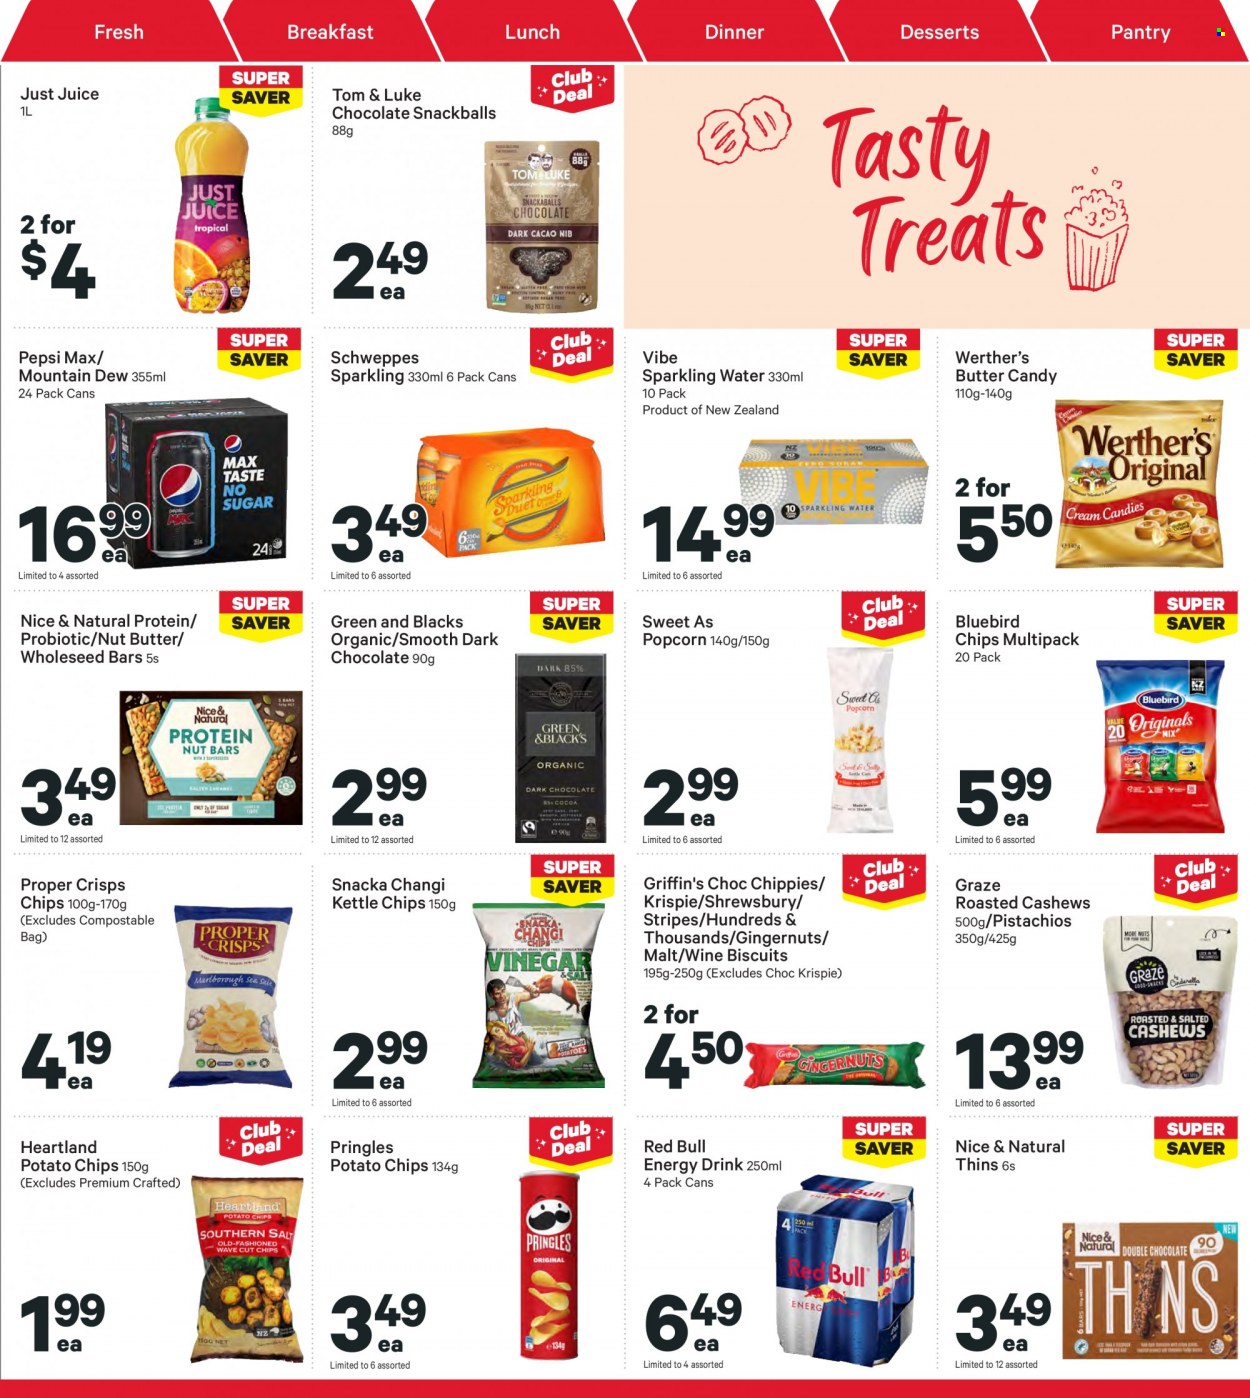 thumbnail - New World mailer - 16.05.2022 - 22.05.2022 - Sales products - chocolate, biscuit, dark chocolate, Griffin's, potato chips, Pringles, chips, Thins, Heartland, Bluebird, popcorn, malt, nut butter, cashews, pistachios, Graze, Mountain Dew, Schweppes, Pepsi, juice, energy drink, Pepsi Max, Red Bull, sparkling water, wine, bag. Page 21.